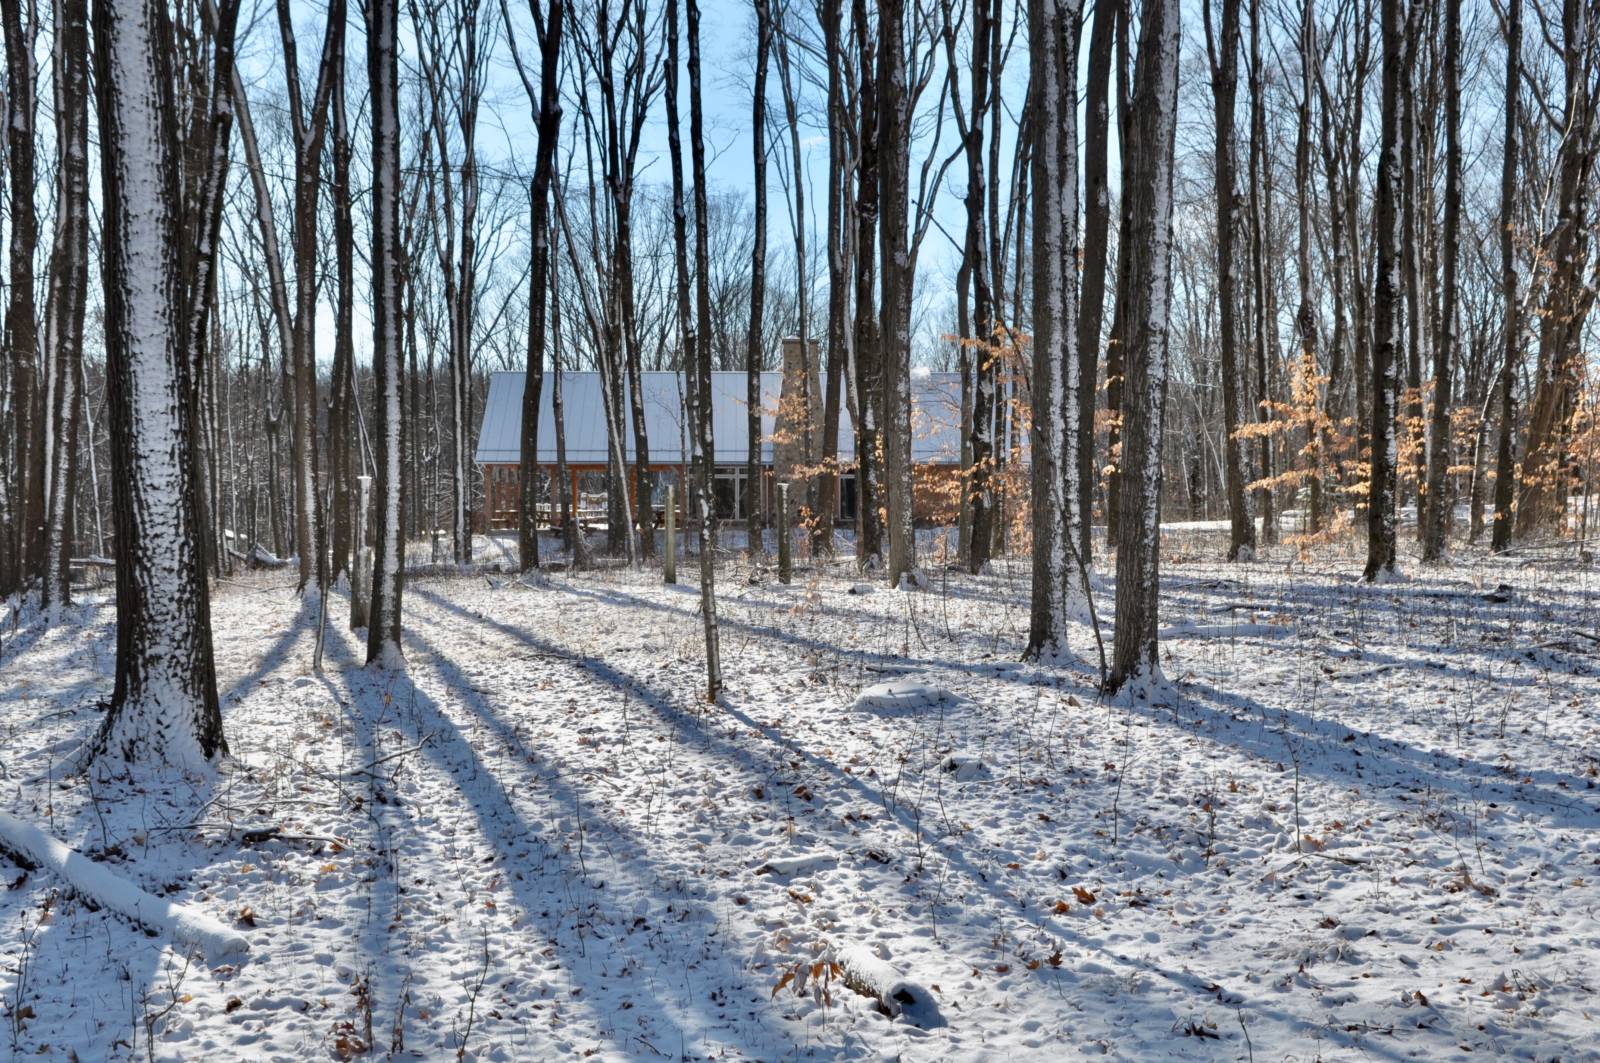 sunlight illumiates the sugarbush forest in winter with snow on the ground and the Riveredge Sugarbush House in the background